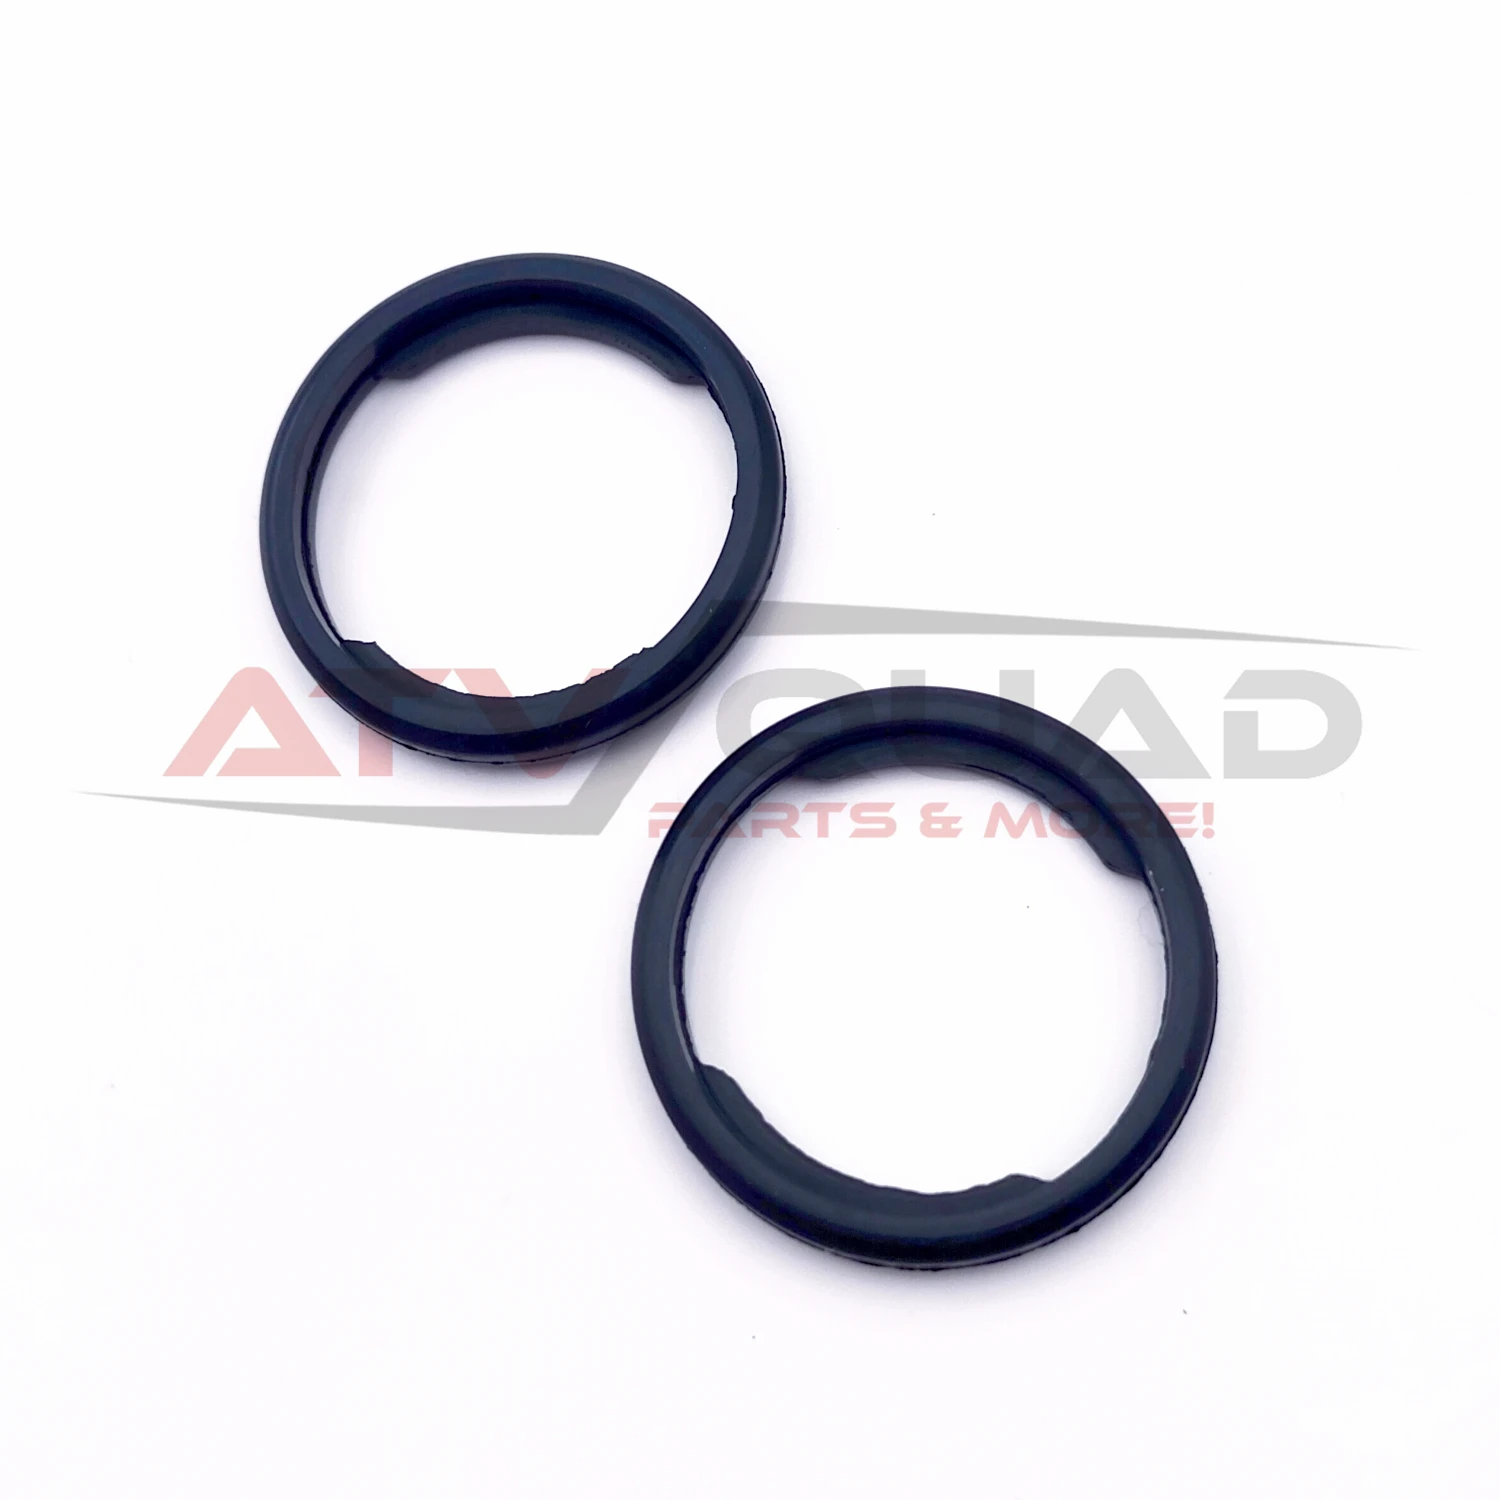 2PCS Thermostat Seal Ring for CFmoto 400 450 500S 520 550 600 Touring 625 800 800EX 800XC 850 X8H.O. 950 950EX 1000 0010-022802 2pcs water pump cover seal ring for cfmoto 800 utility 800 trail 800xc 850 x8h o 950 950ex 950ho 1000 x10 u10 z10 0jwa 080004